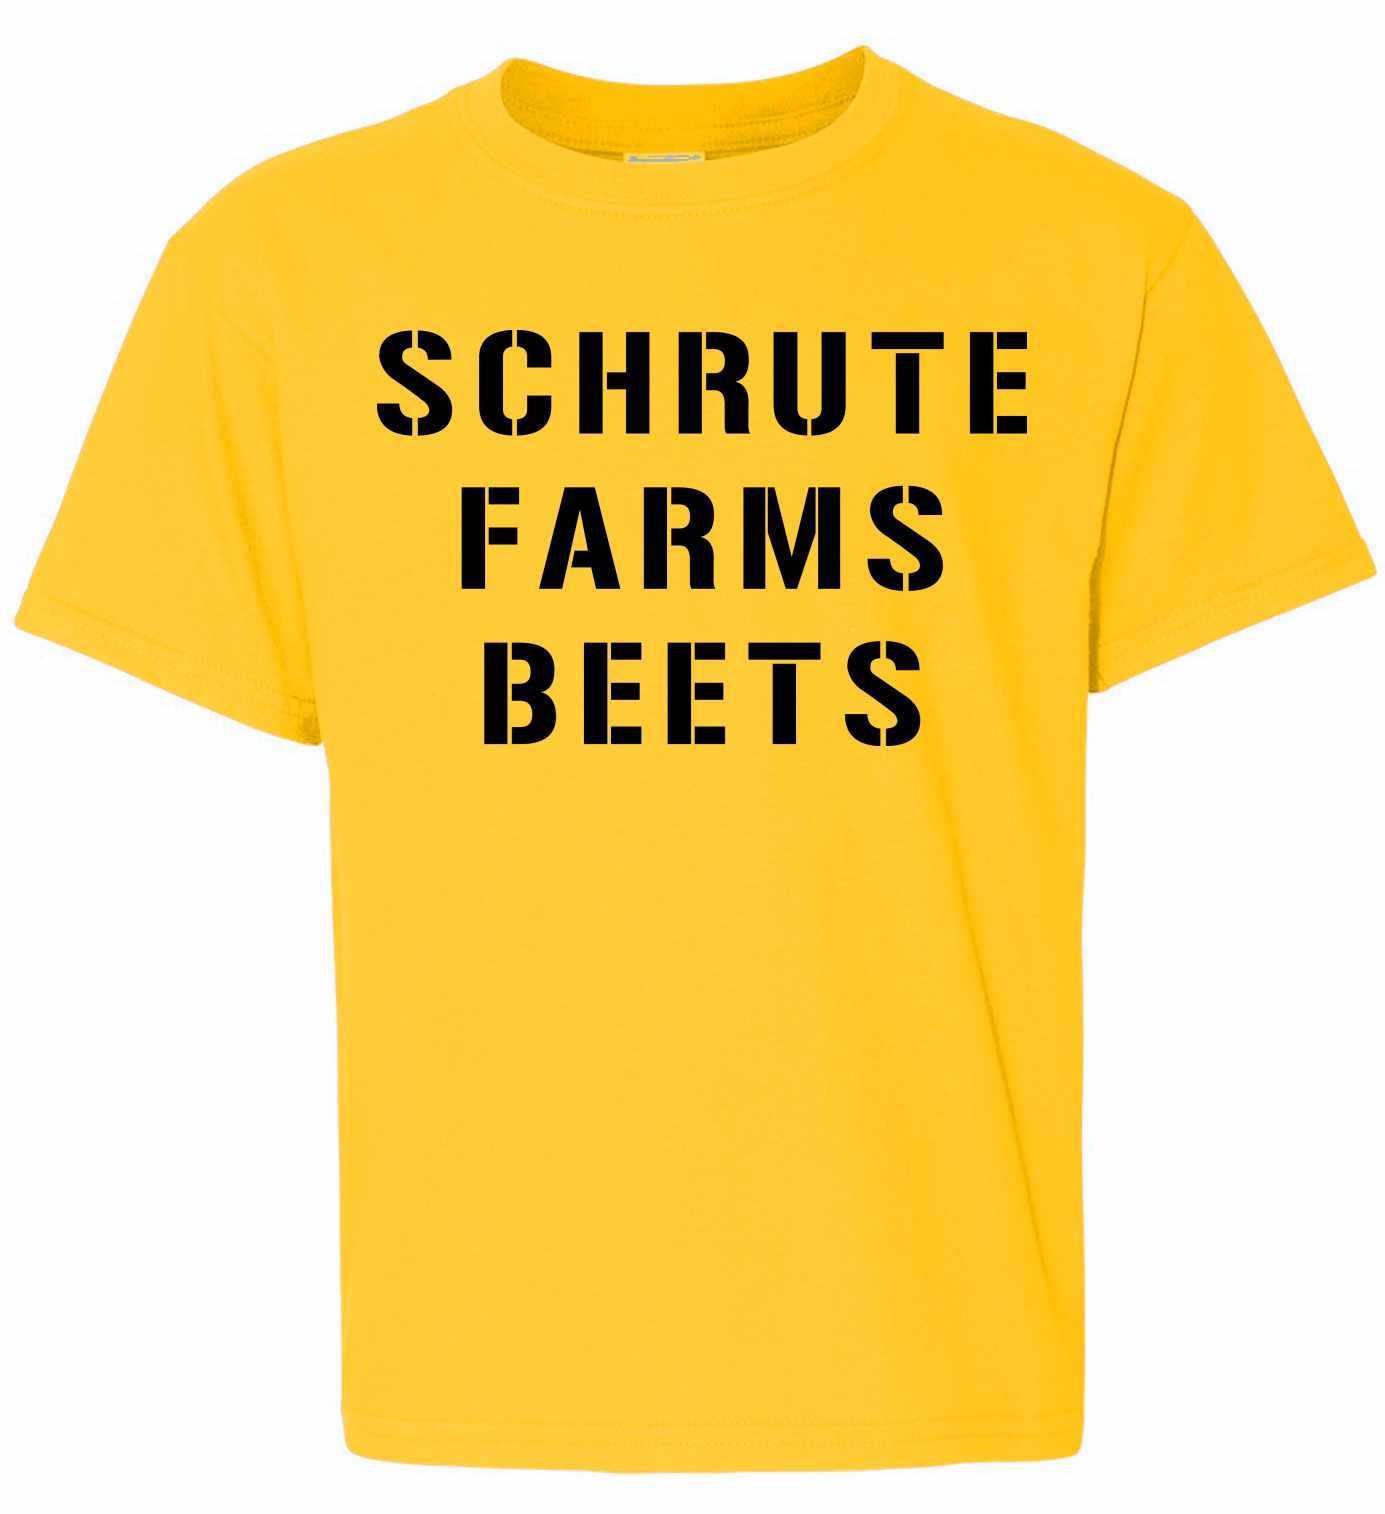 SCHRUTE FARMS BEETS on Youth T-Shirt (#396-201)